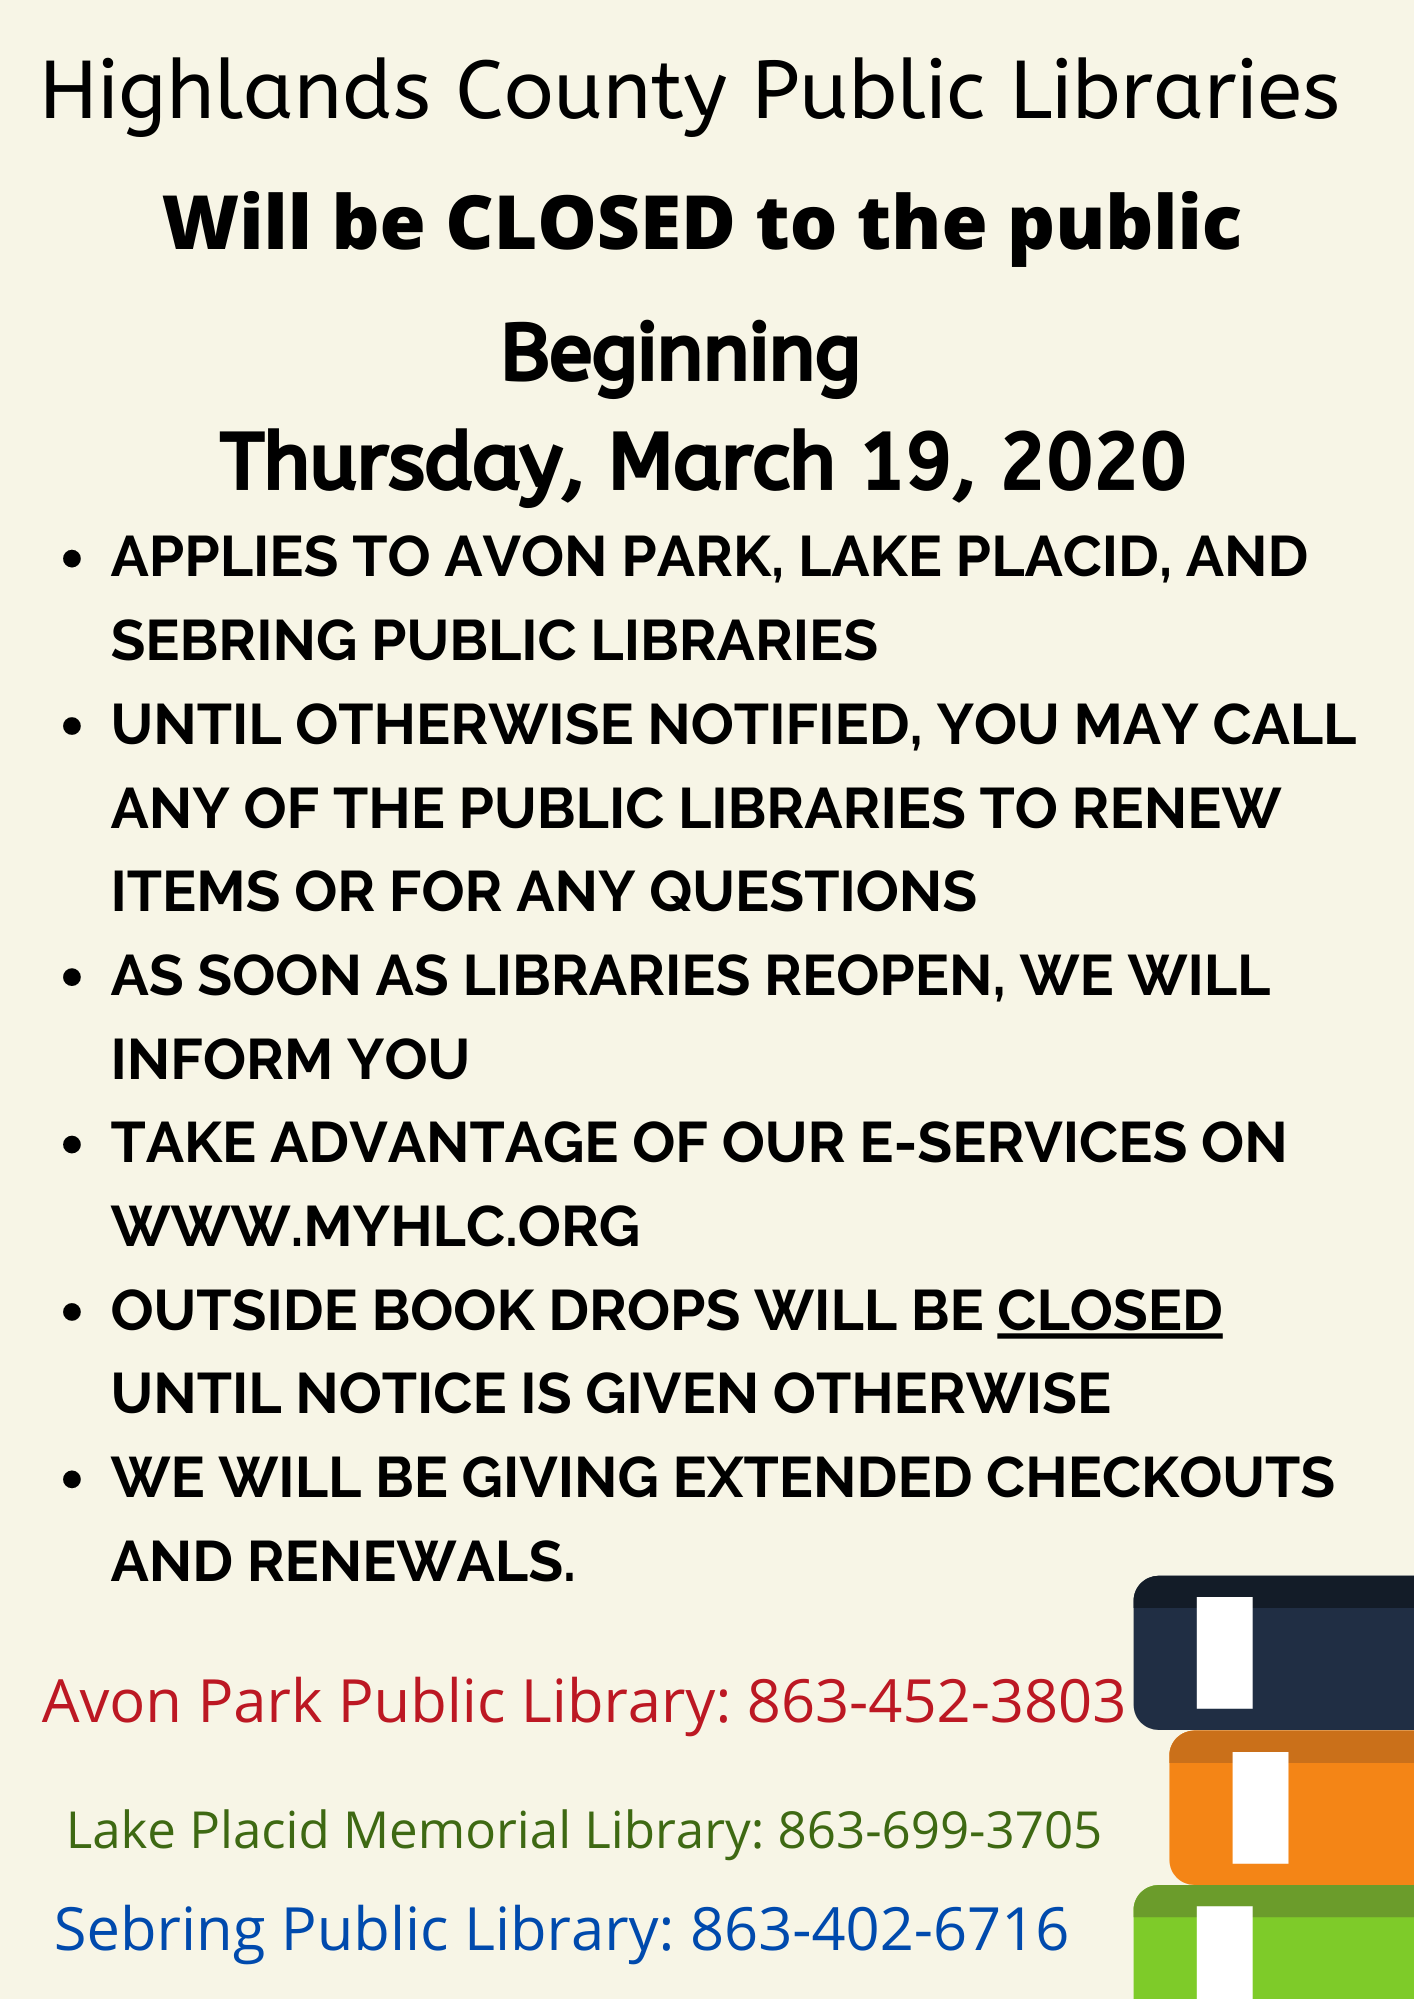 Highlands County Public libraries will be closed to the public starting tomorrow, Thursday, March 19, 2020.